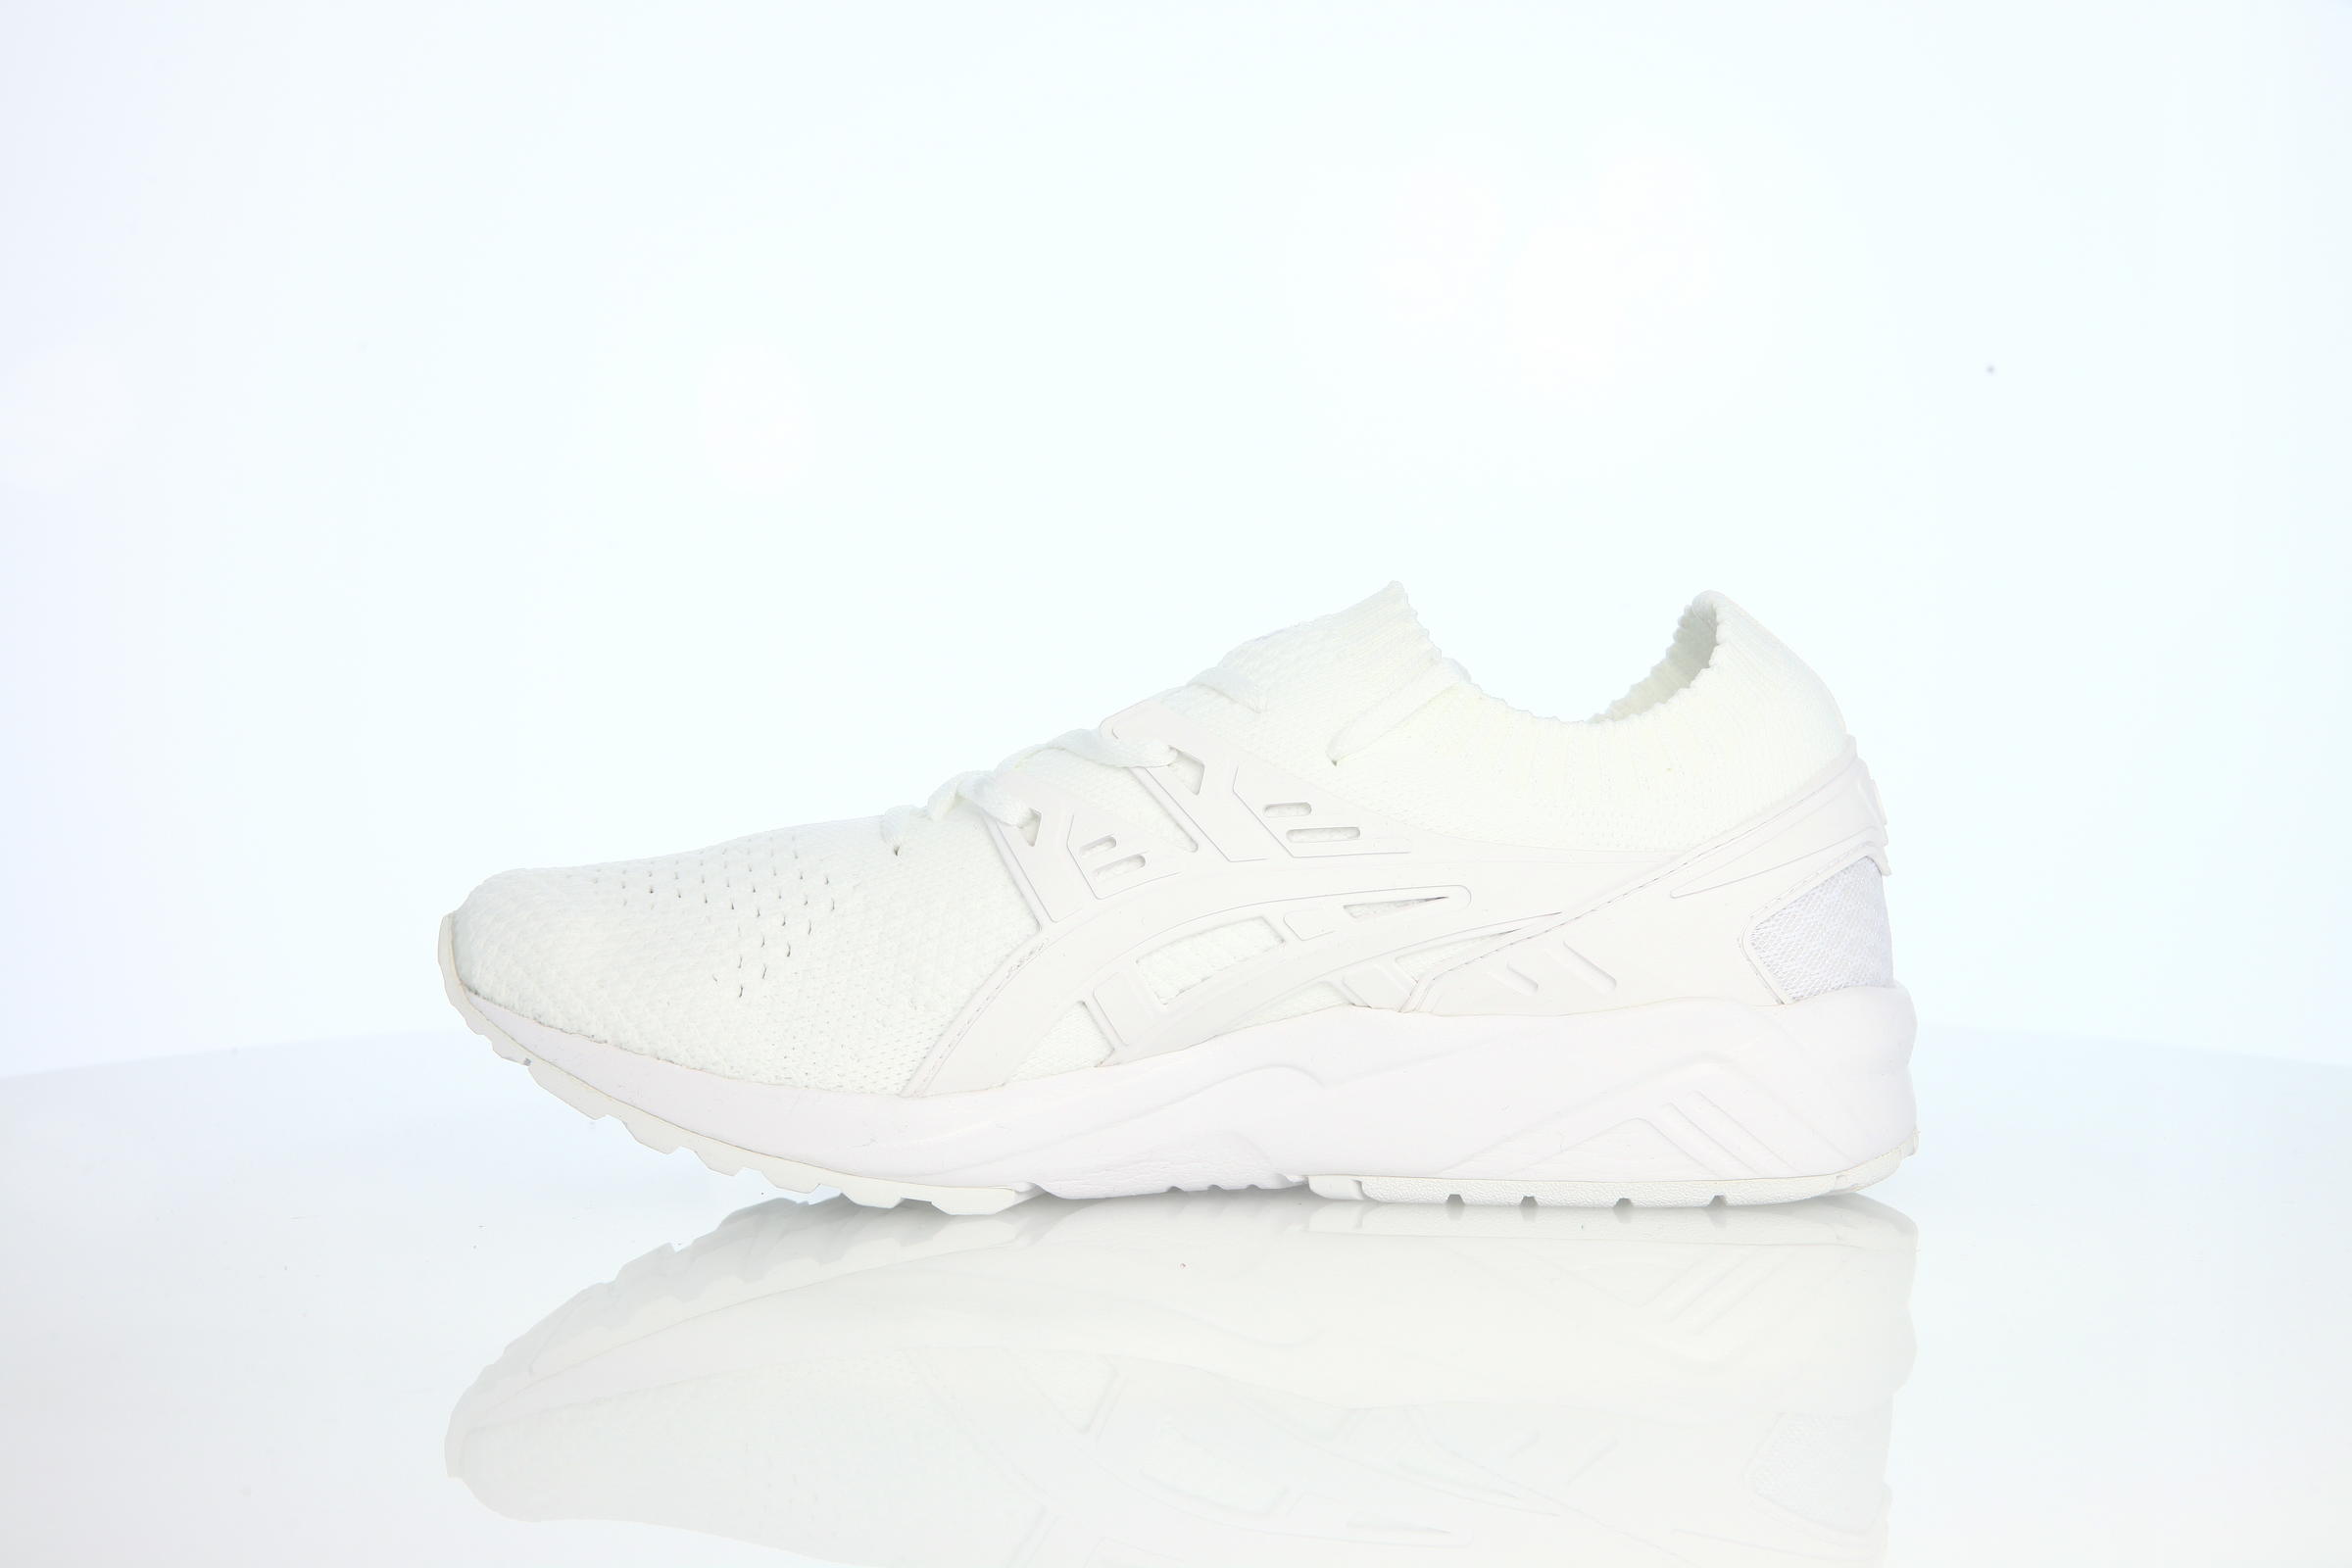 Asics Gel-Kayano Trainer One Piece Knit Pack "All White"